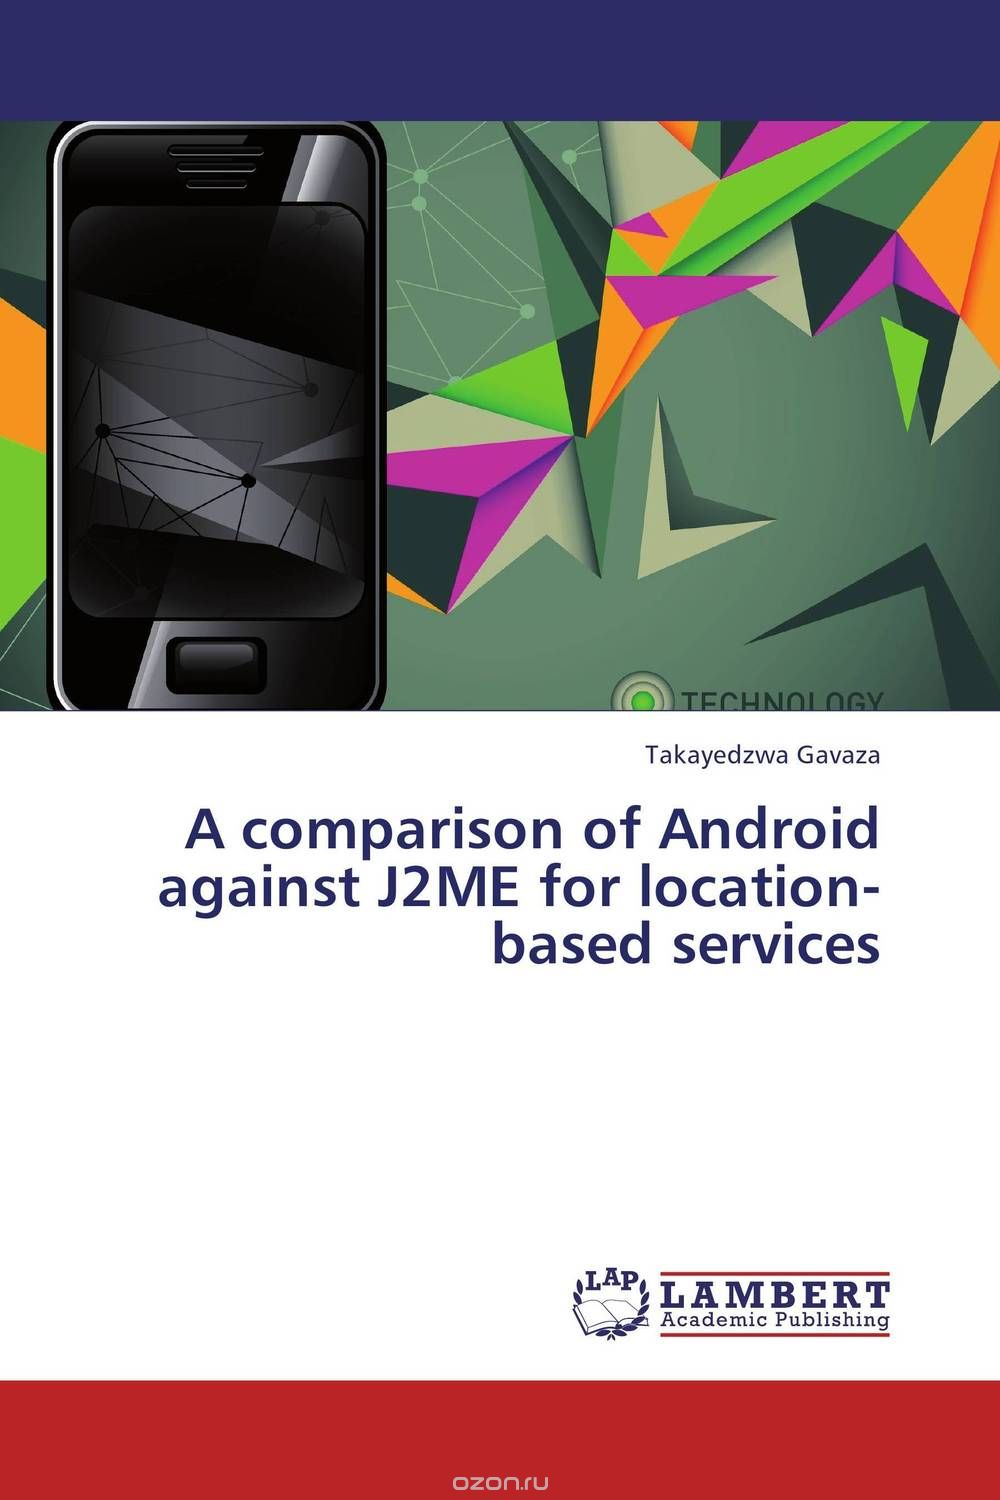 A comparison of Android against J2ME for location-based services